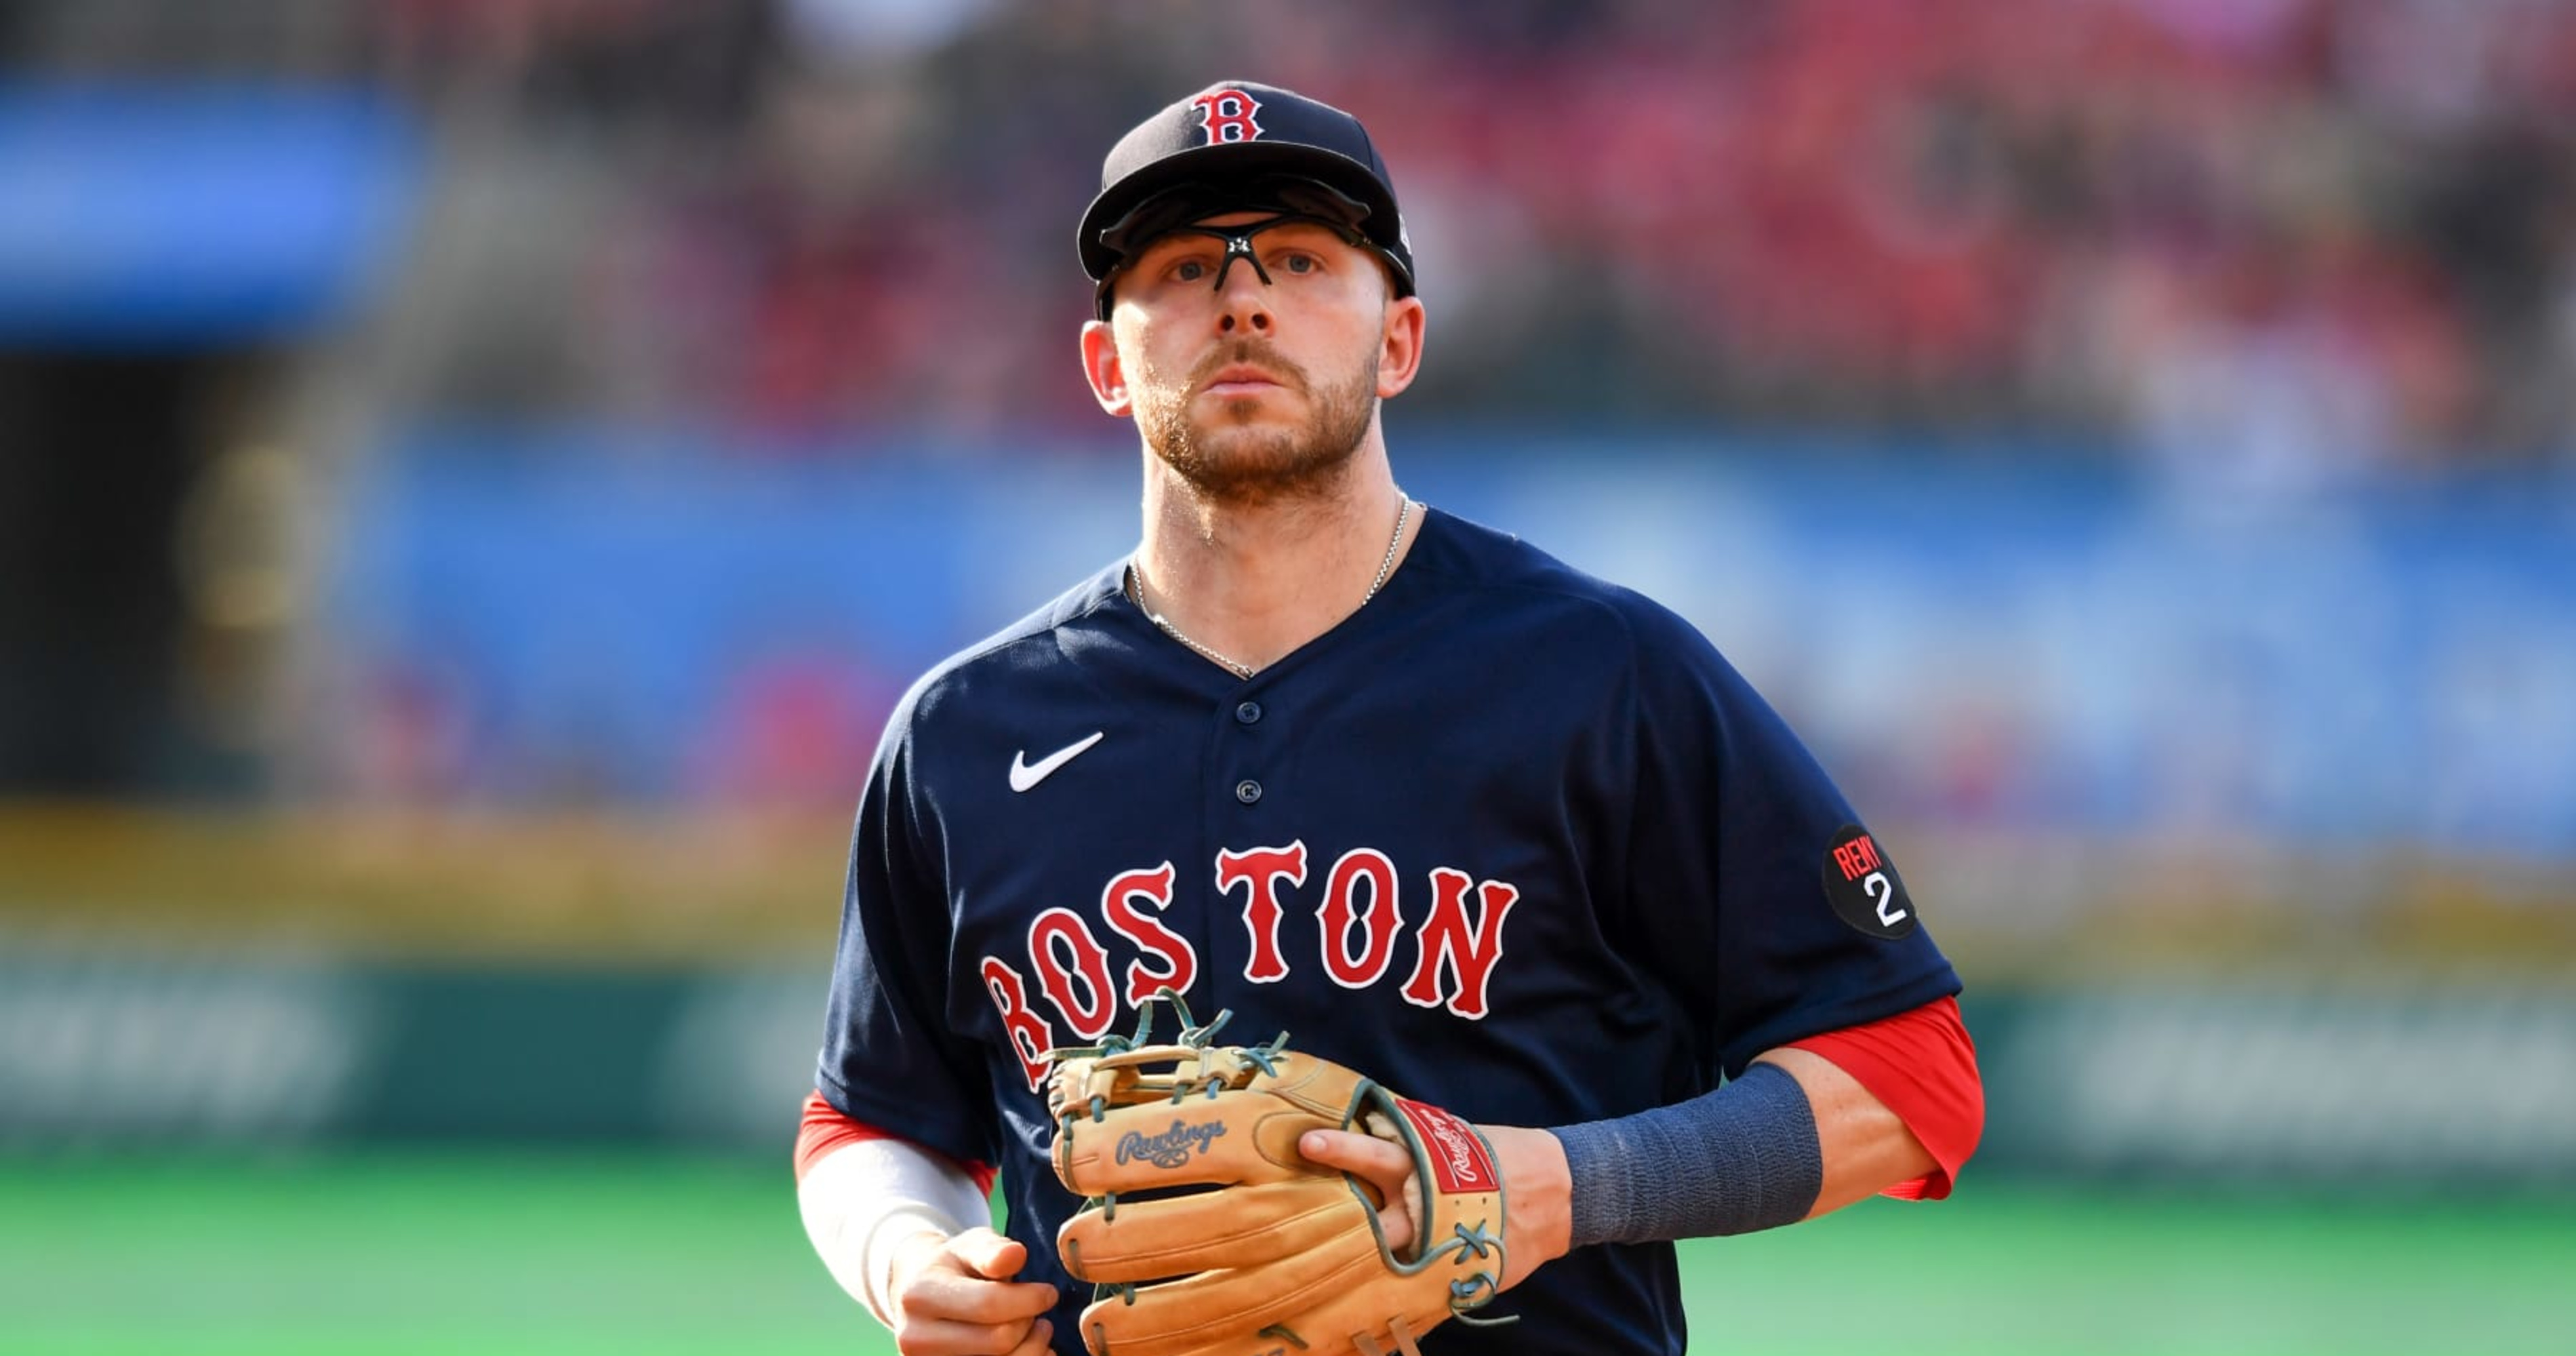 Where Red Sox's Trevor Story Stands With Injury Rehab